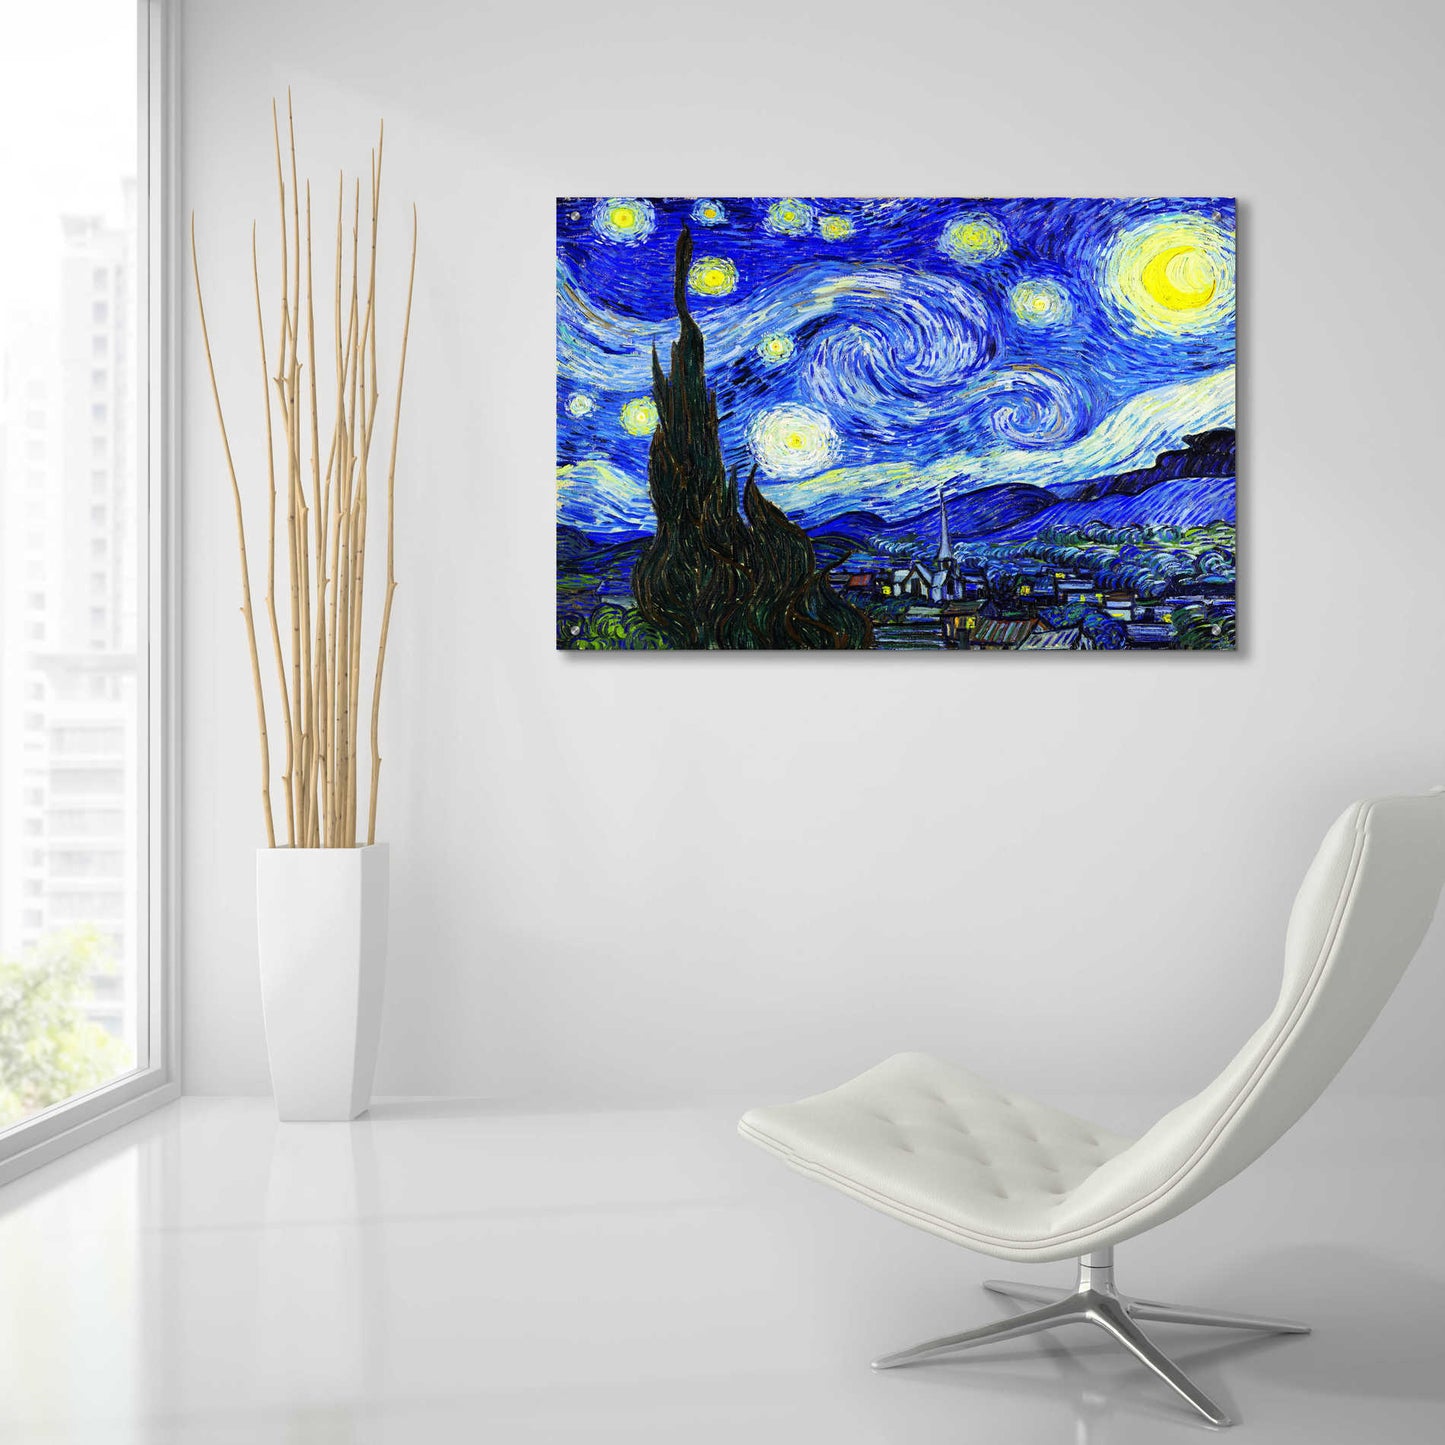 Epic Art 'The Starry Night' by Vincent van Gogh, Acrylic Glass Wall Art,36x24